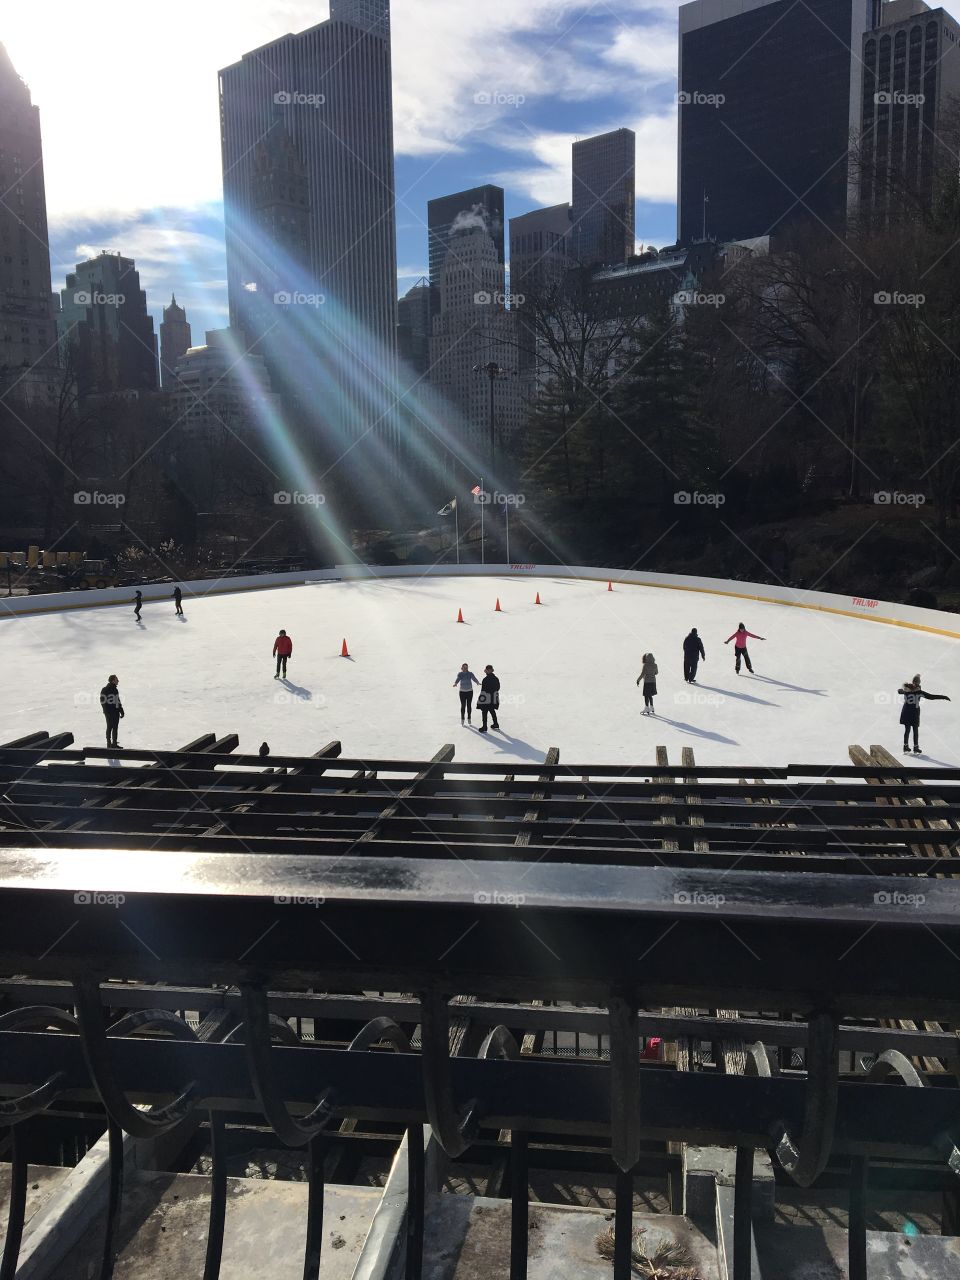 Ice skating rink in Central Park with a beautiful view of the skyscrapers in the city